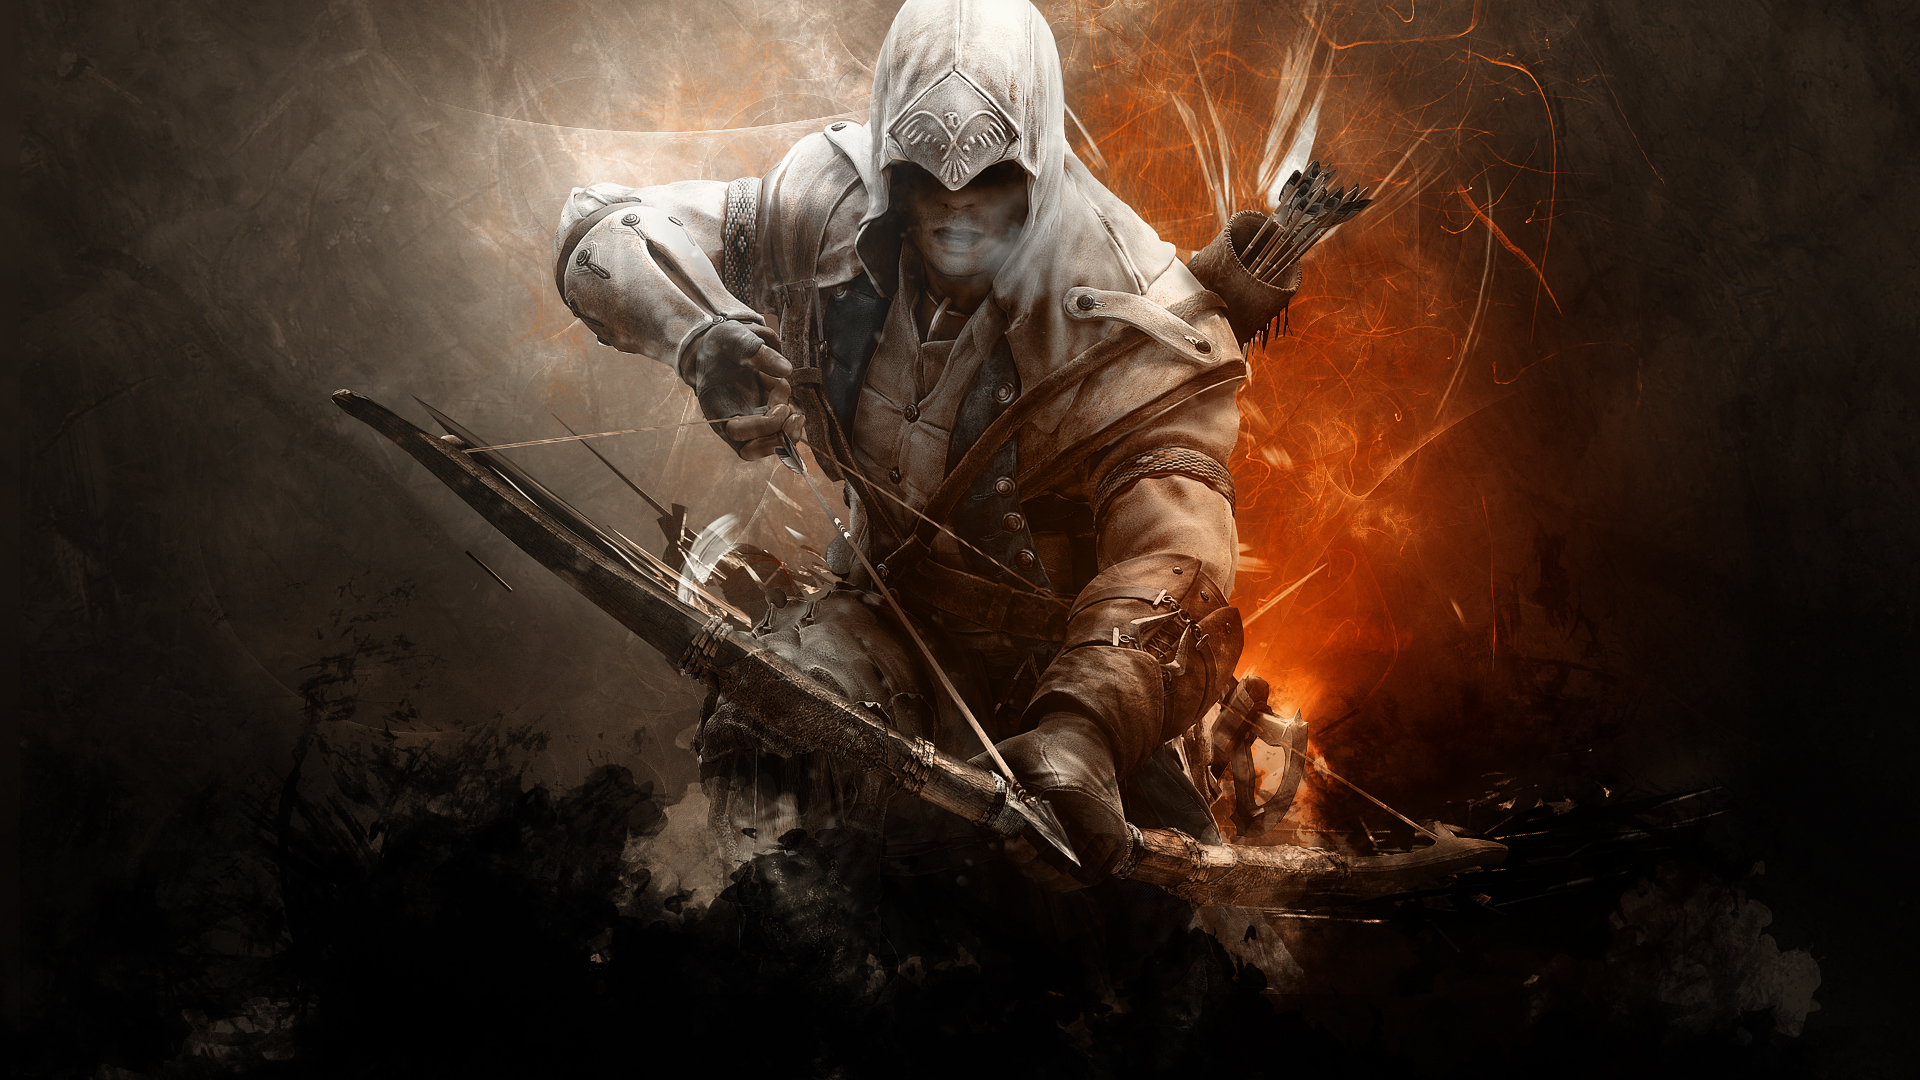 assassin's creed full hd wallpapers,action adventure game,movie,pc game,darkness,adventure game